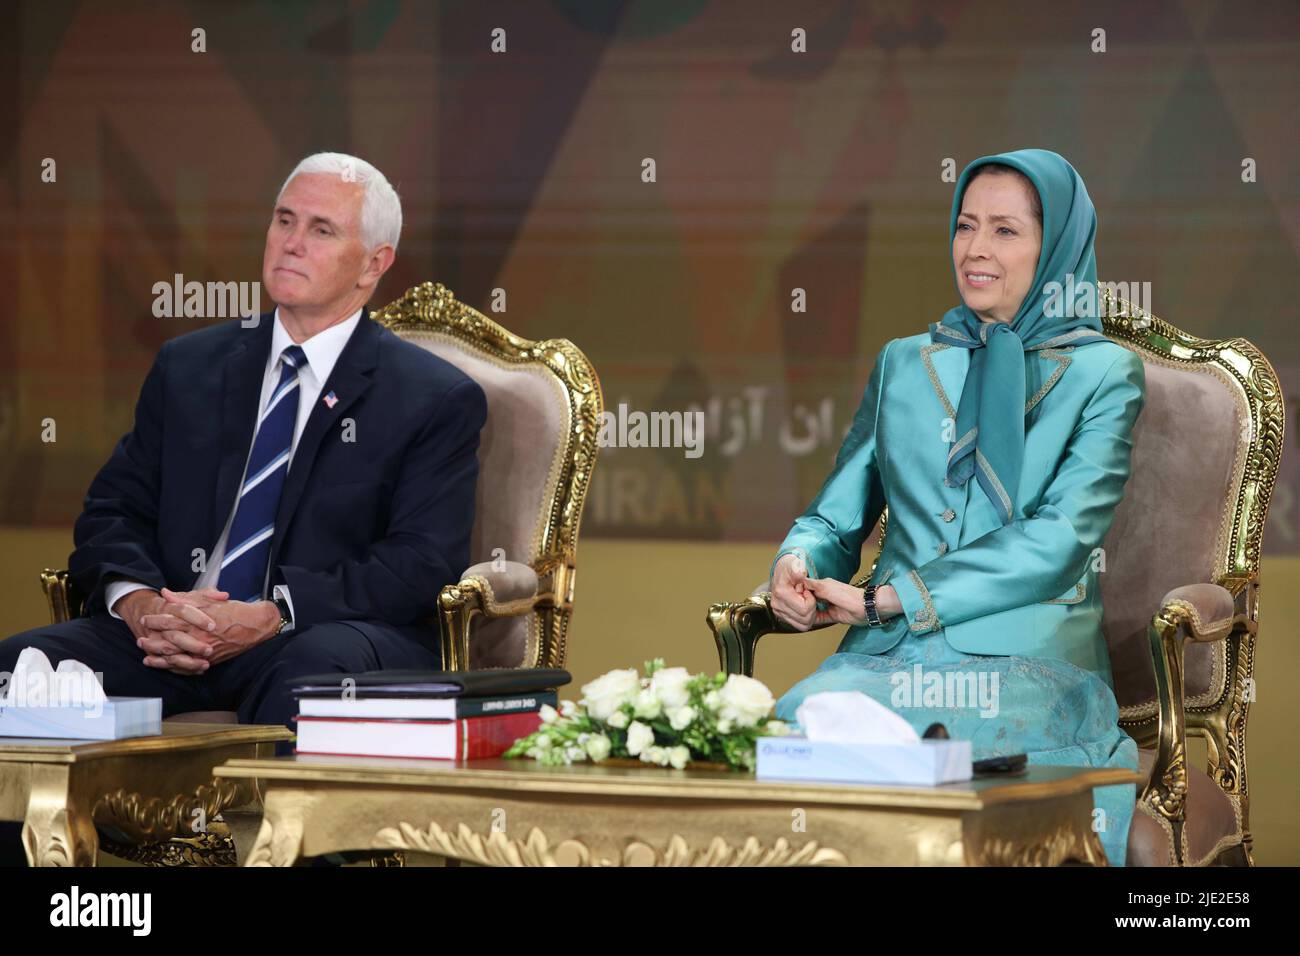 Manez, Albania. 23rd June, 2022. Vice President Mike Pence and NCRI President-elect Maryam Rajavi seen at a gathering of residents of Ashraf 3, home to thousands of members of the principal Iranian